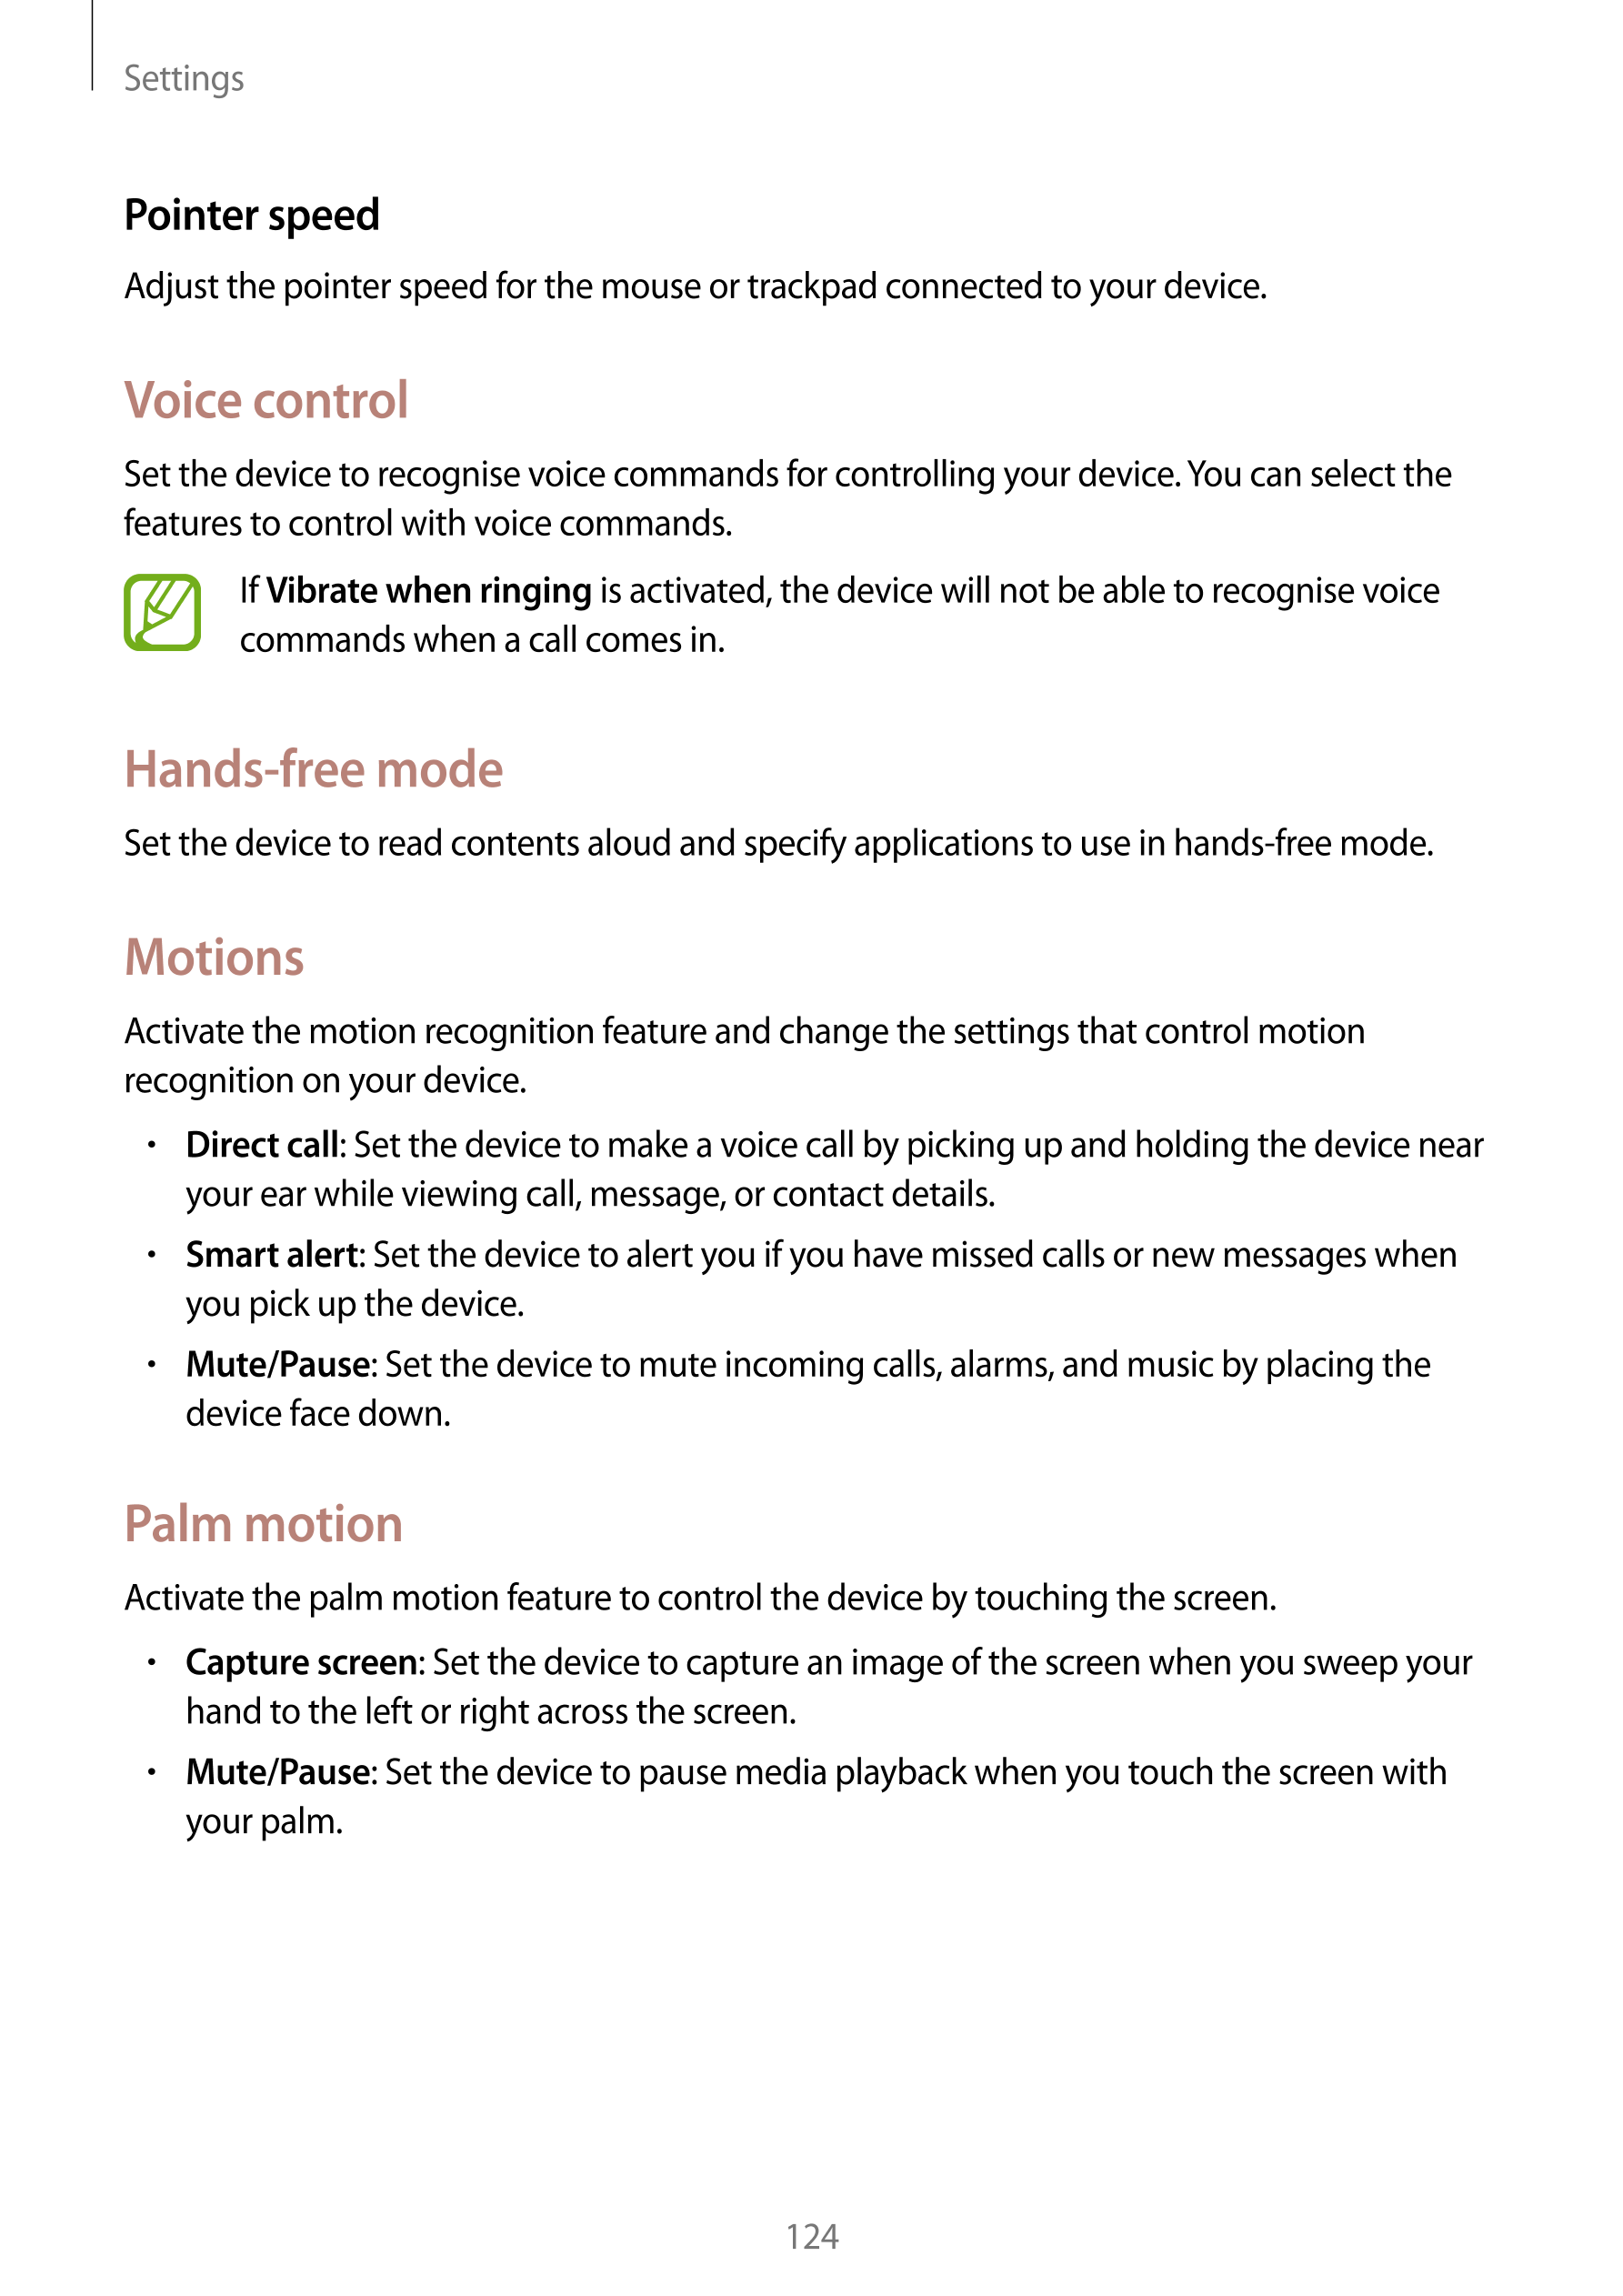 Settings
Pointer speed
Adjust the pointer speed for the mouse or trackpad connected to your device.
Voice control
Set the device